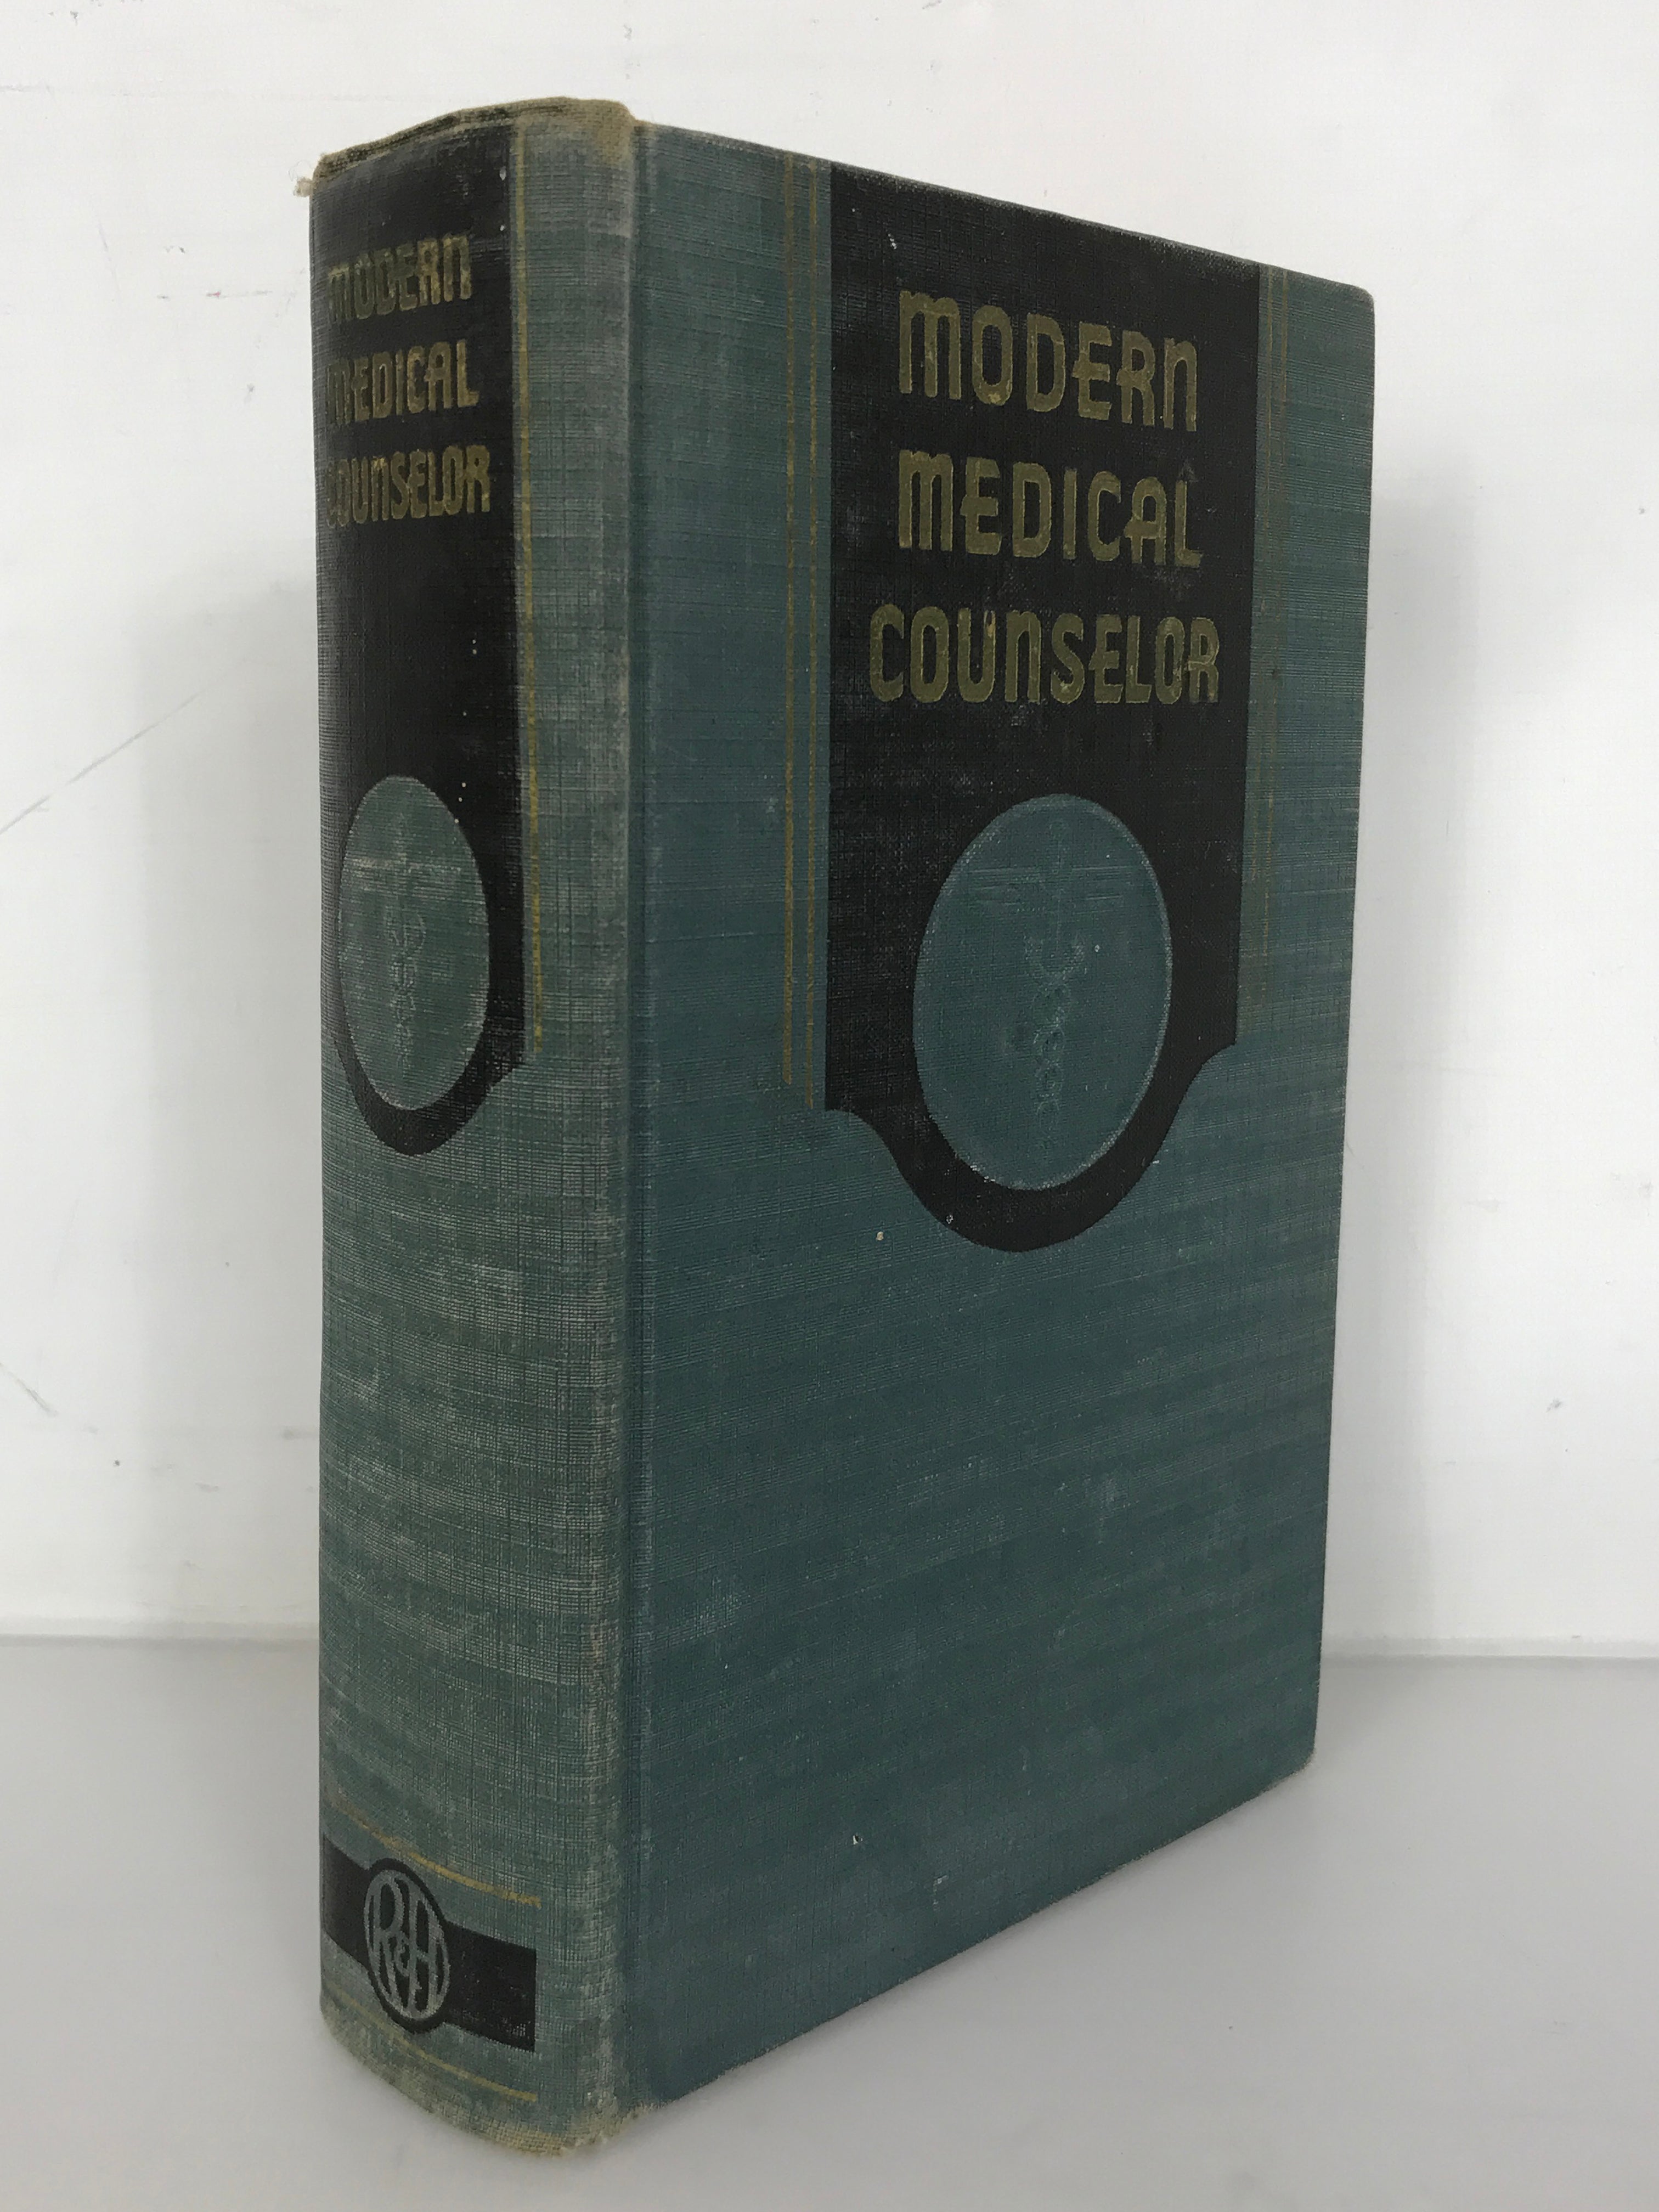 Modern Medical Counselor A Practical Guide to Health by Hubert O. Swartout 1943 HC